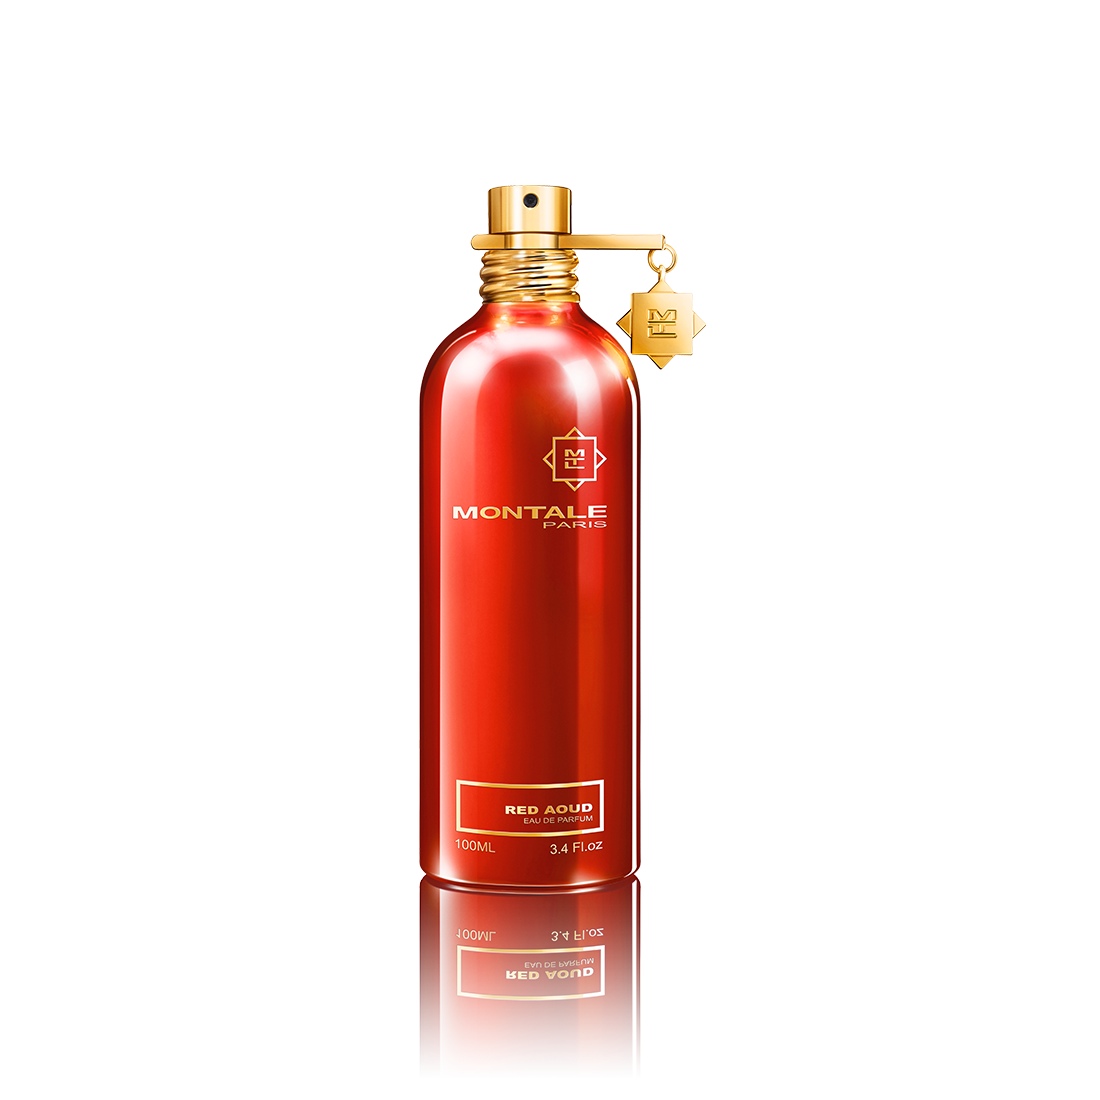 MONTALE - RED AOUD